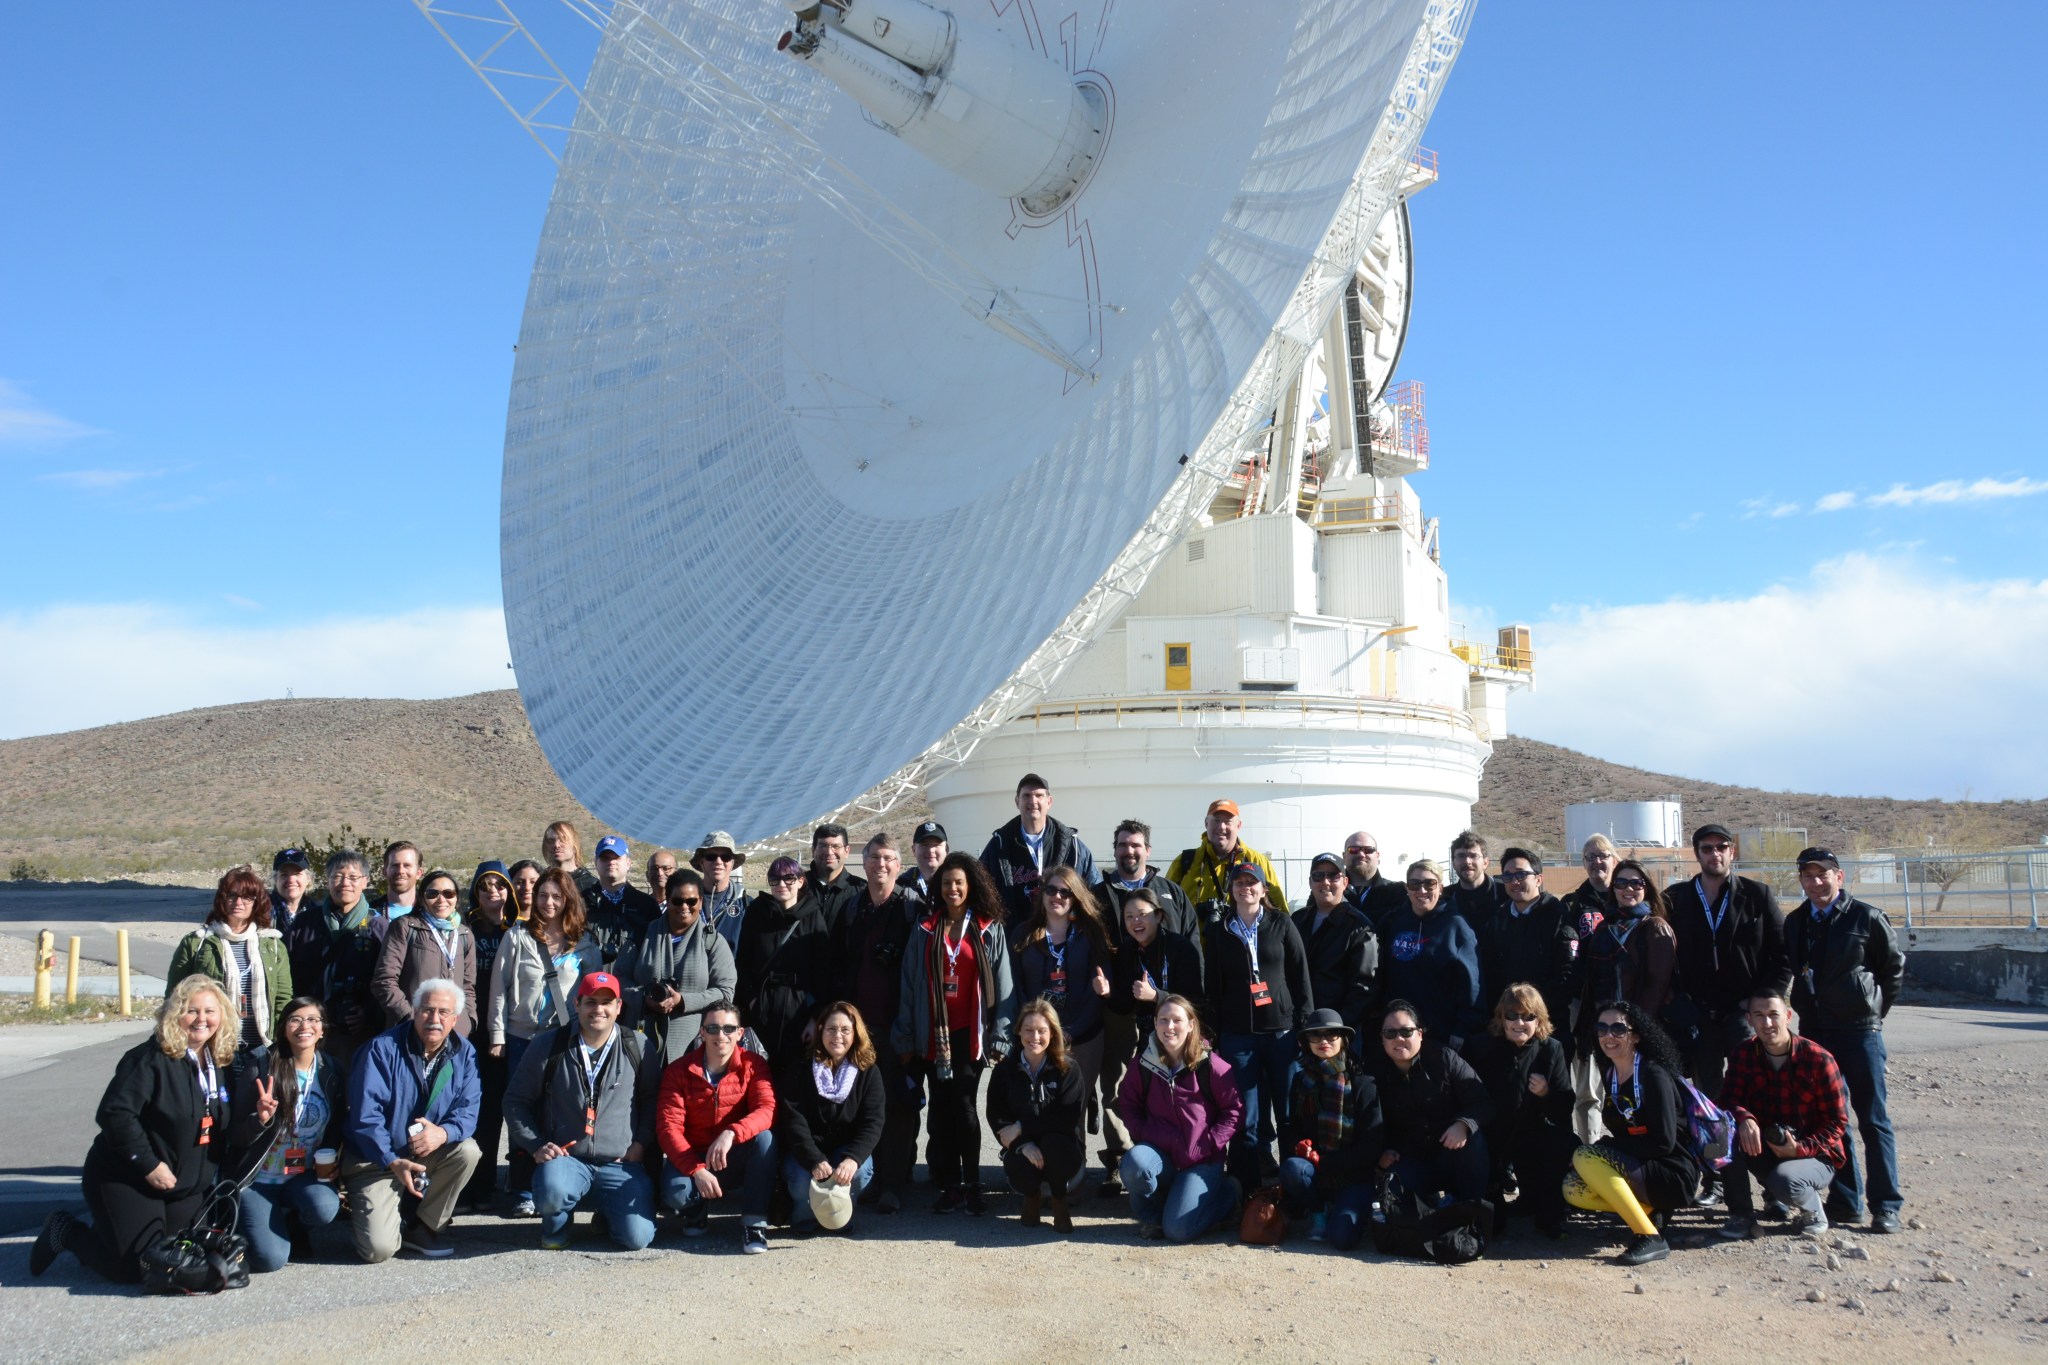 A group of people pose beneath a Deep Space Network antenna at the Goldstone Deep Space Communications Complex.